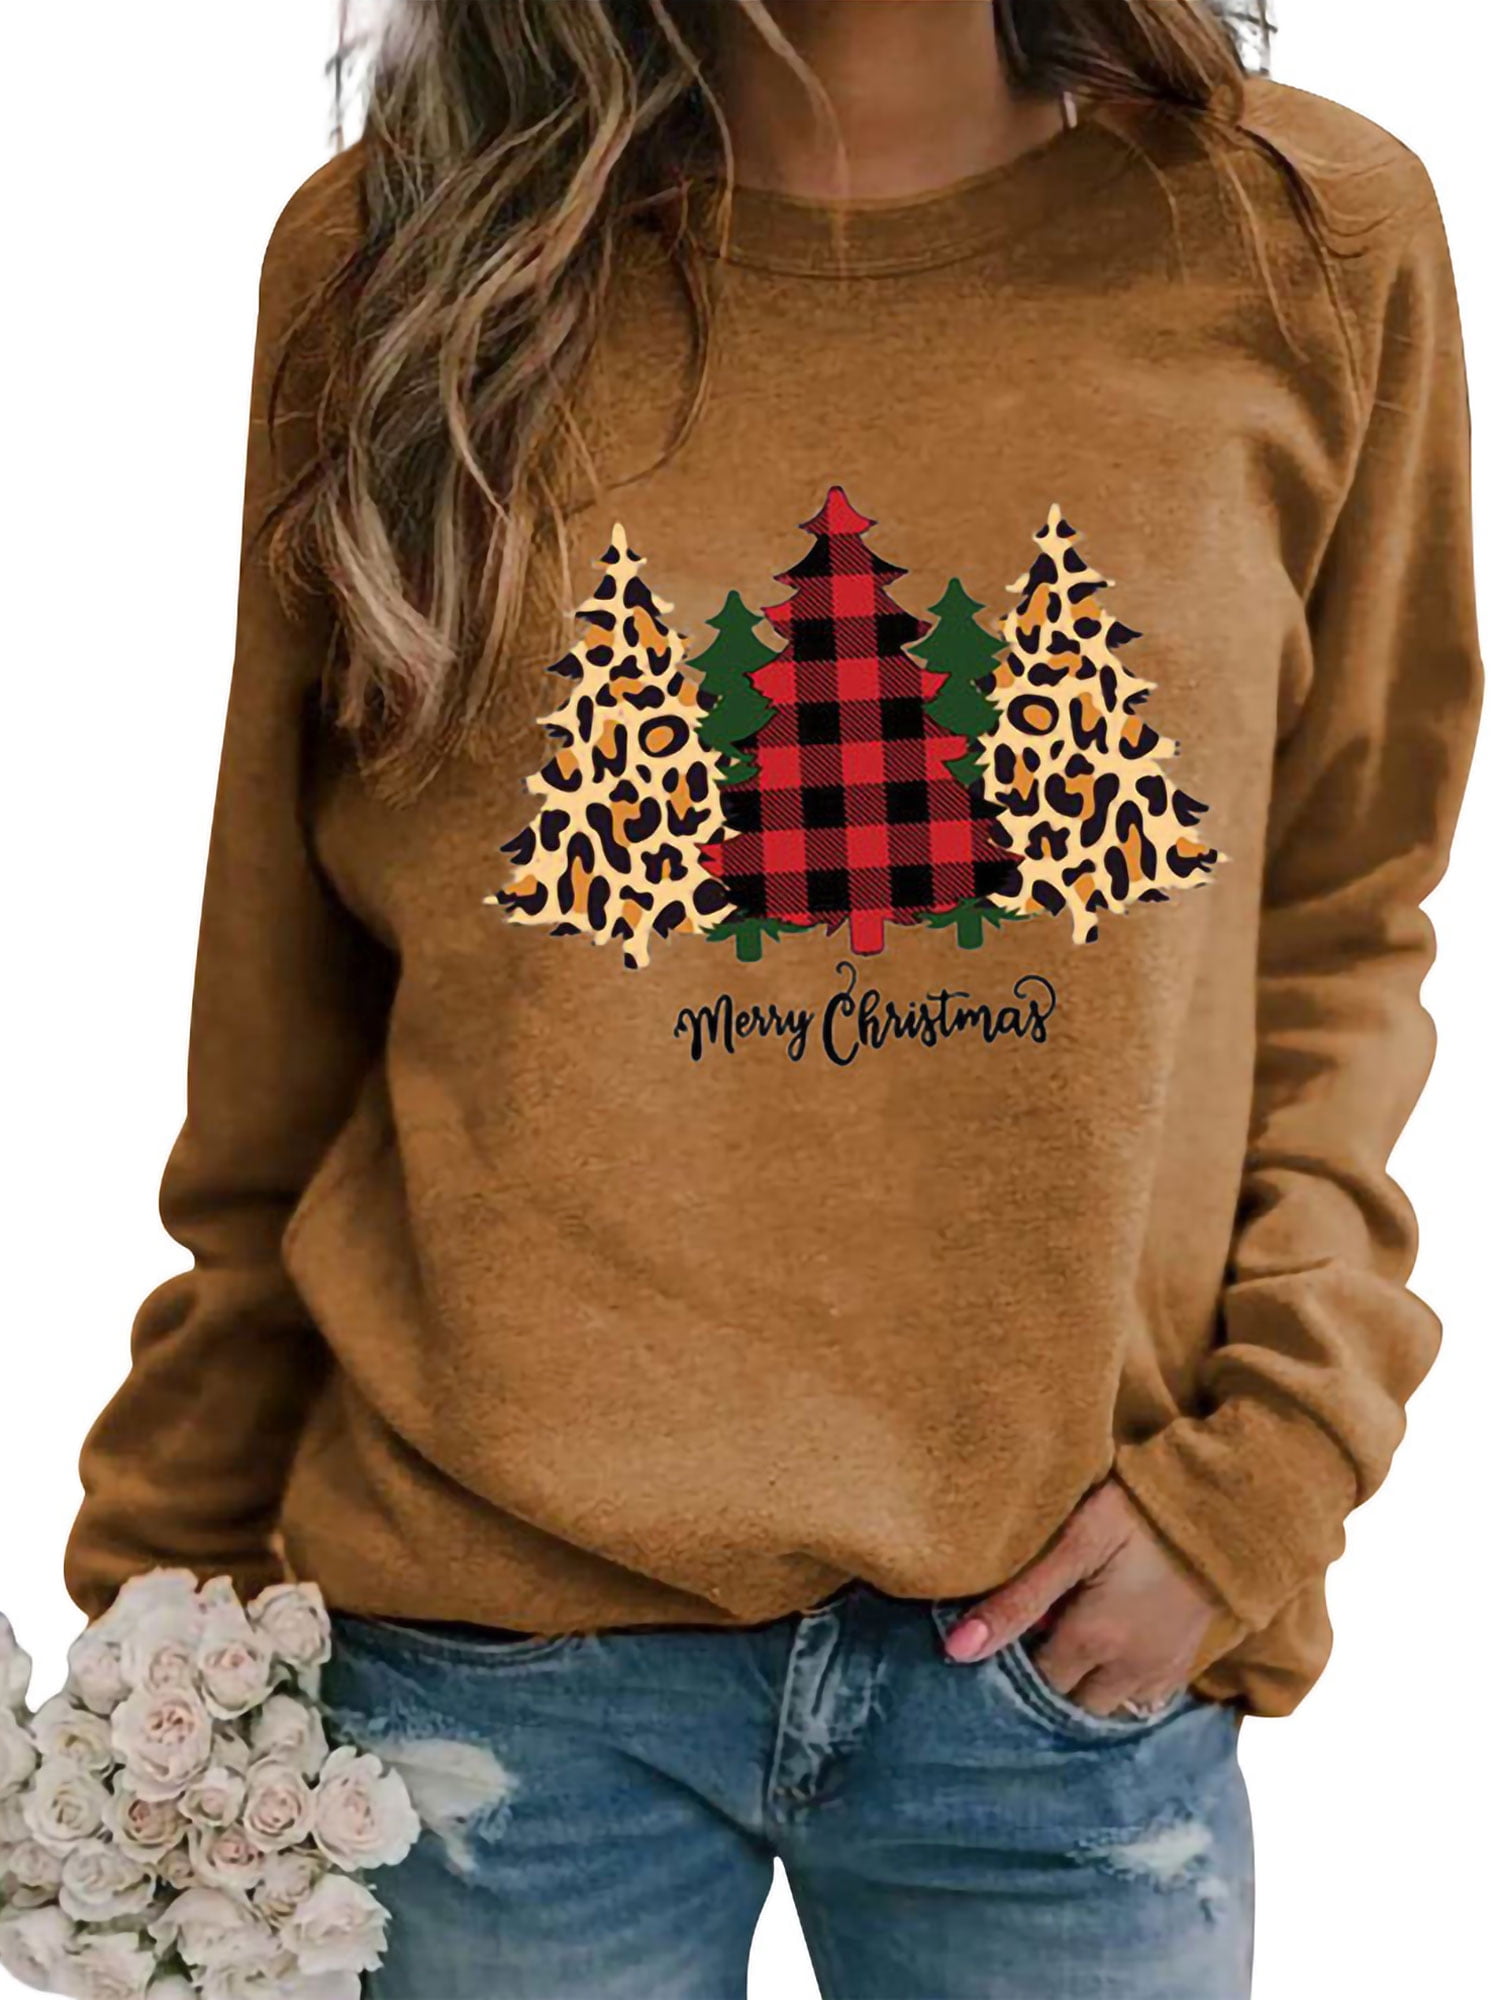 Family Gift Friend Gift Holiday Party Outfit Merry and Bright Cute Sweatshirt Hoodie Winter Scene Sweatshirt Christmas Sweatshirt